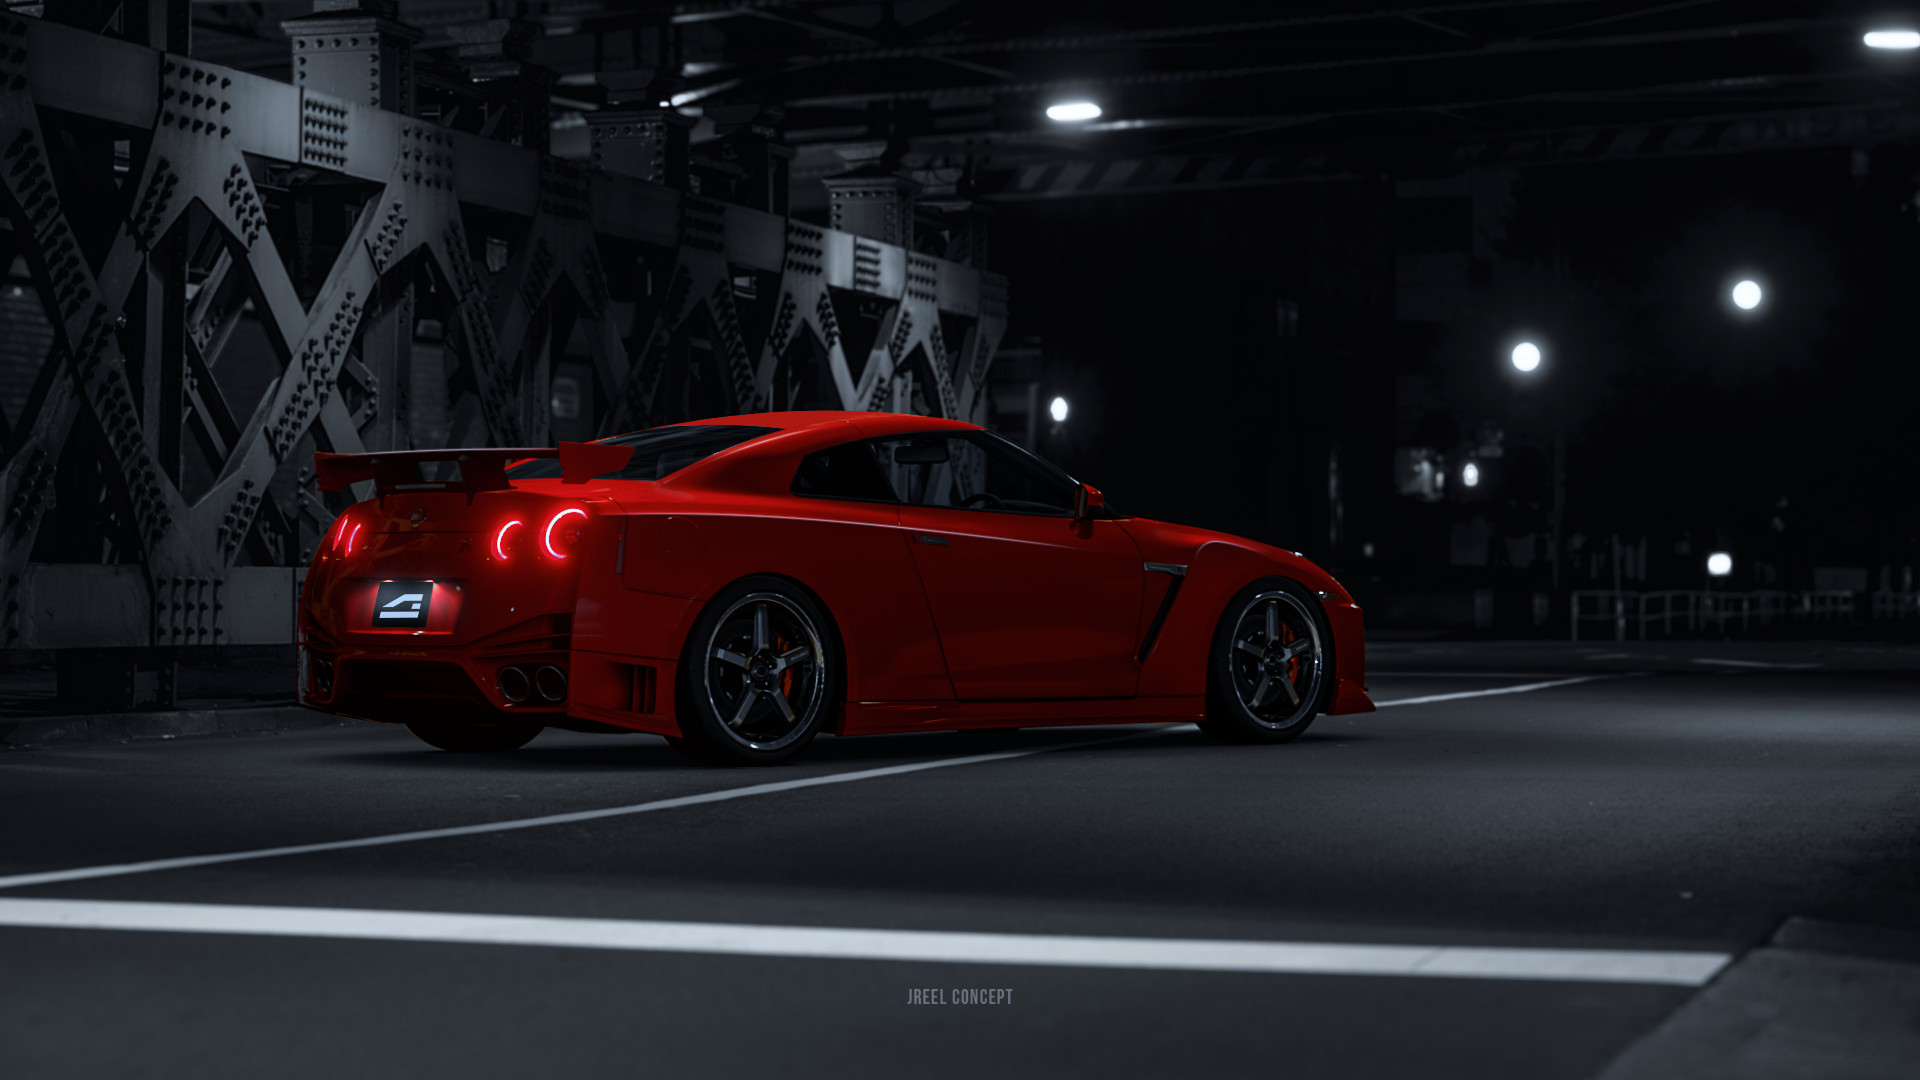 Nissan Gt R Nismo Wallpapers